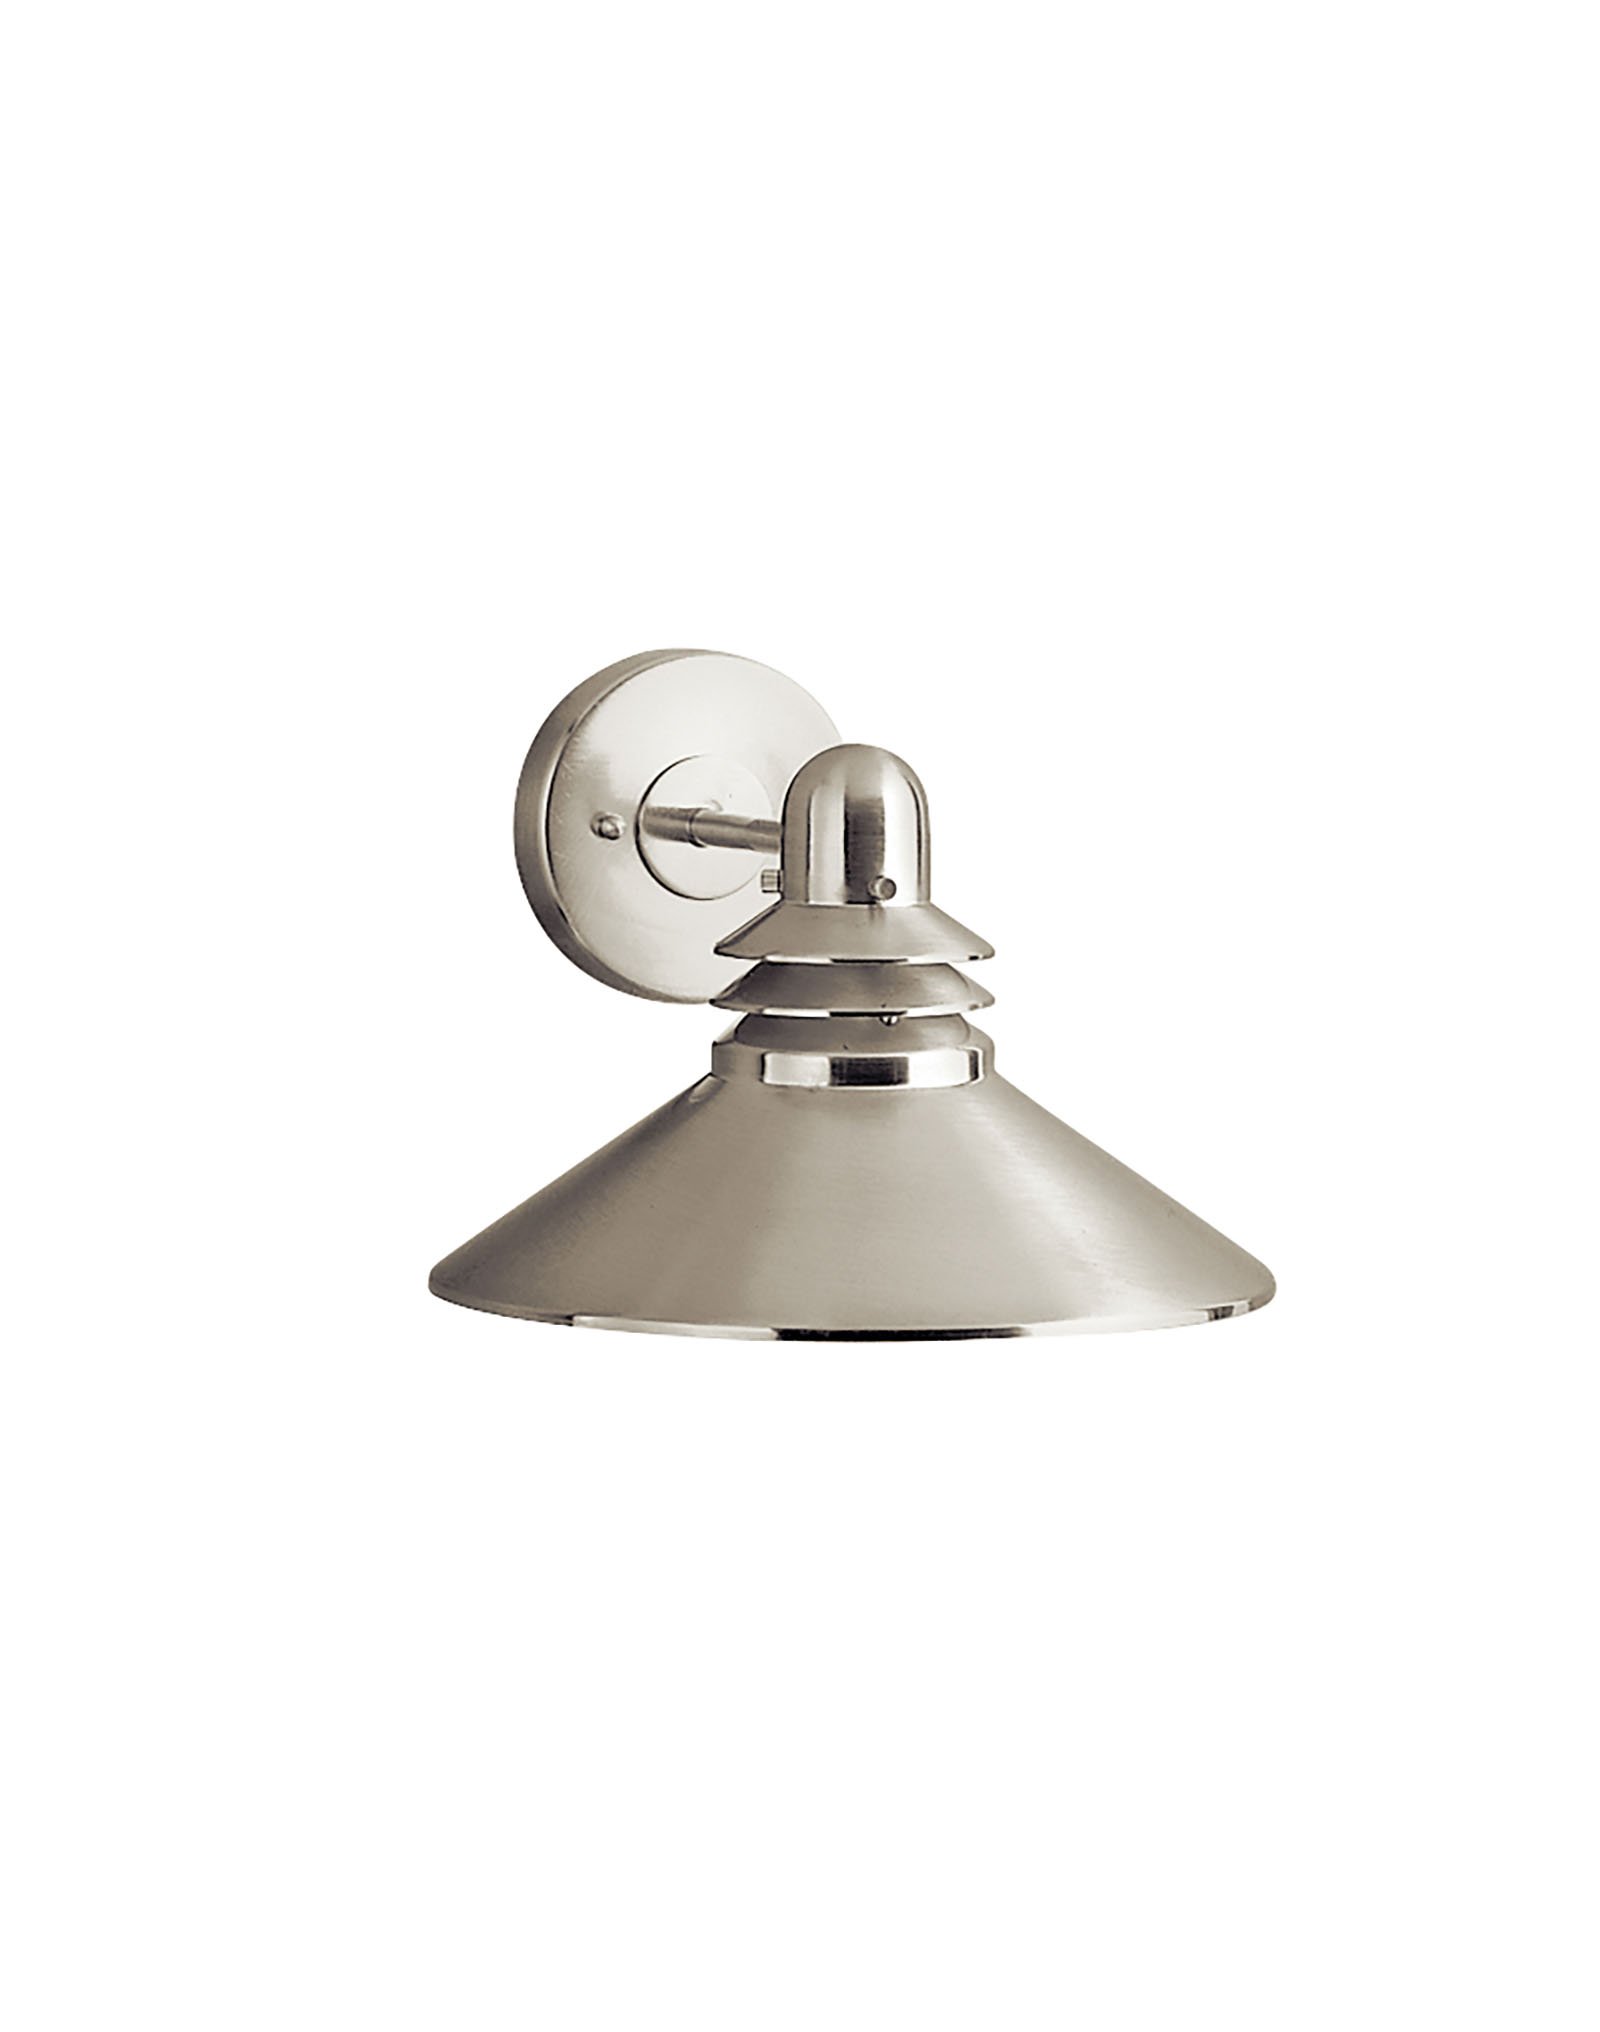 The Grenoble(TM) Collection takes classic form and elevates it to a new standard with universal appeal. The central element of its design is the cone-shaped Brushed Nickel shade. The cone connects to the wall, giving the Grenoble(TM) Collection a clean profile that is decidedly contemporary without being overly modern. The Grenoble(TM) Collection also has this decorative and versatile wall sconce for any room inside and outside of your home. Its U.L. listed, one light design uses a 150-watt (max.) bulb for outstanding lighting in any situation. At 11in. wide, the Grenoble(TM) Wall Sconce can be installed with the shade up or down leaving you with multiple options. The only question you have to answer is where you want to install it.